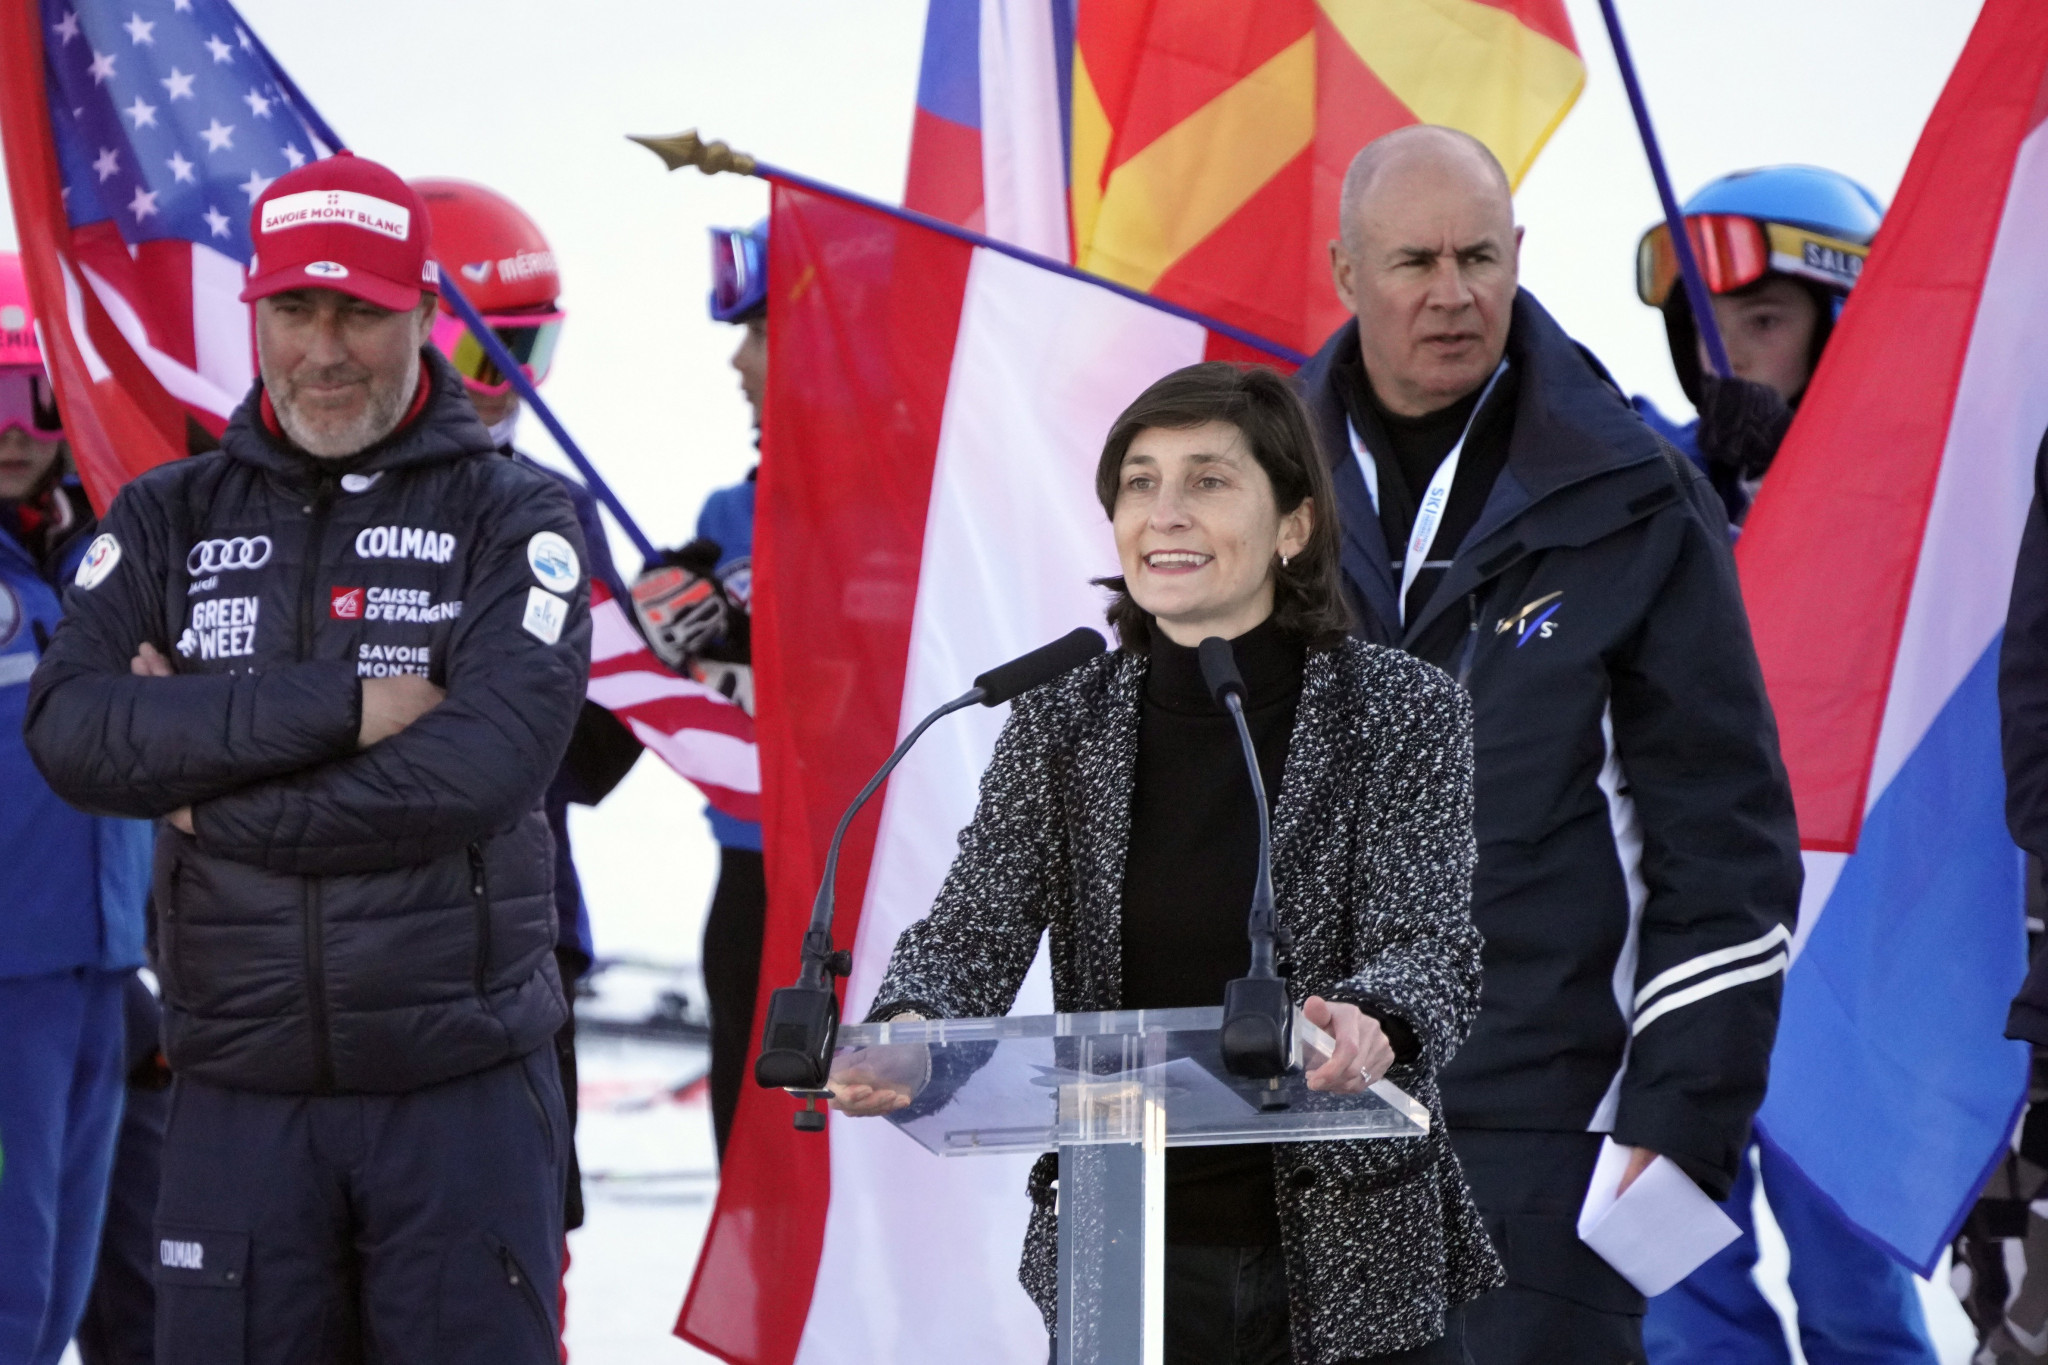 Exclusive: France among four nations interested in bidding for 2027 FISU Winter World University Games